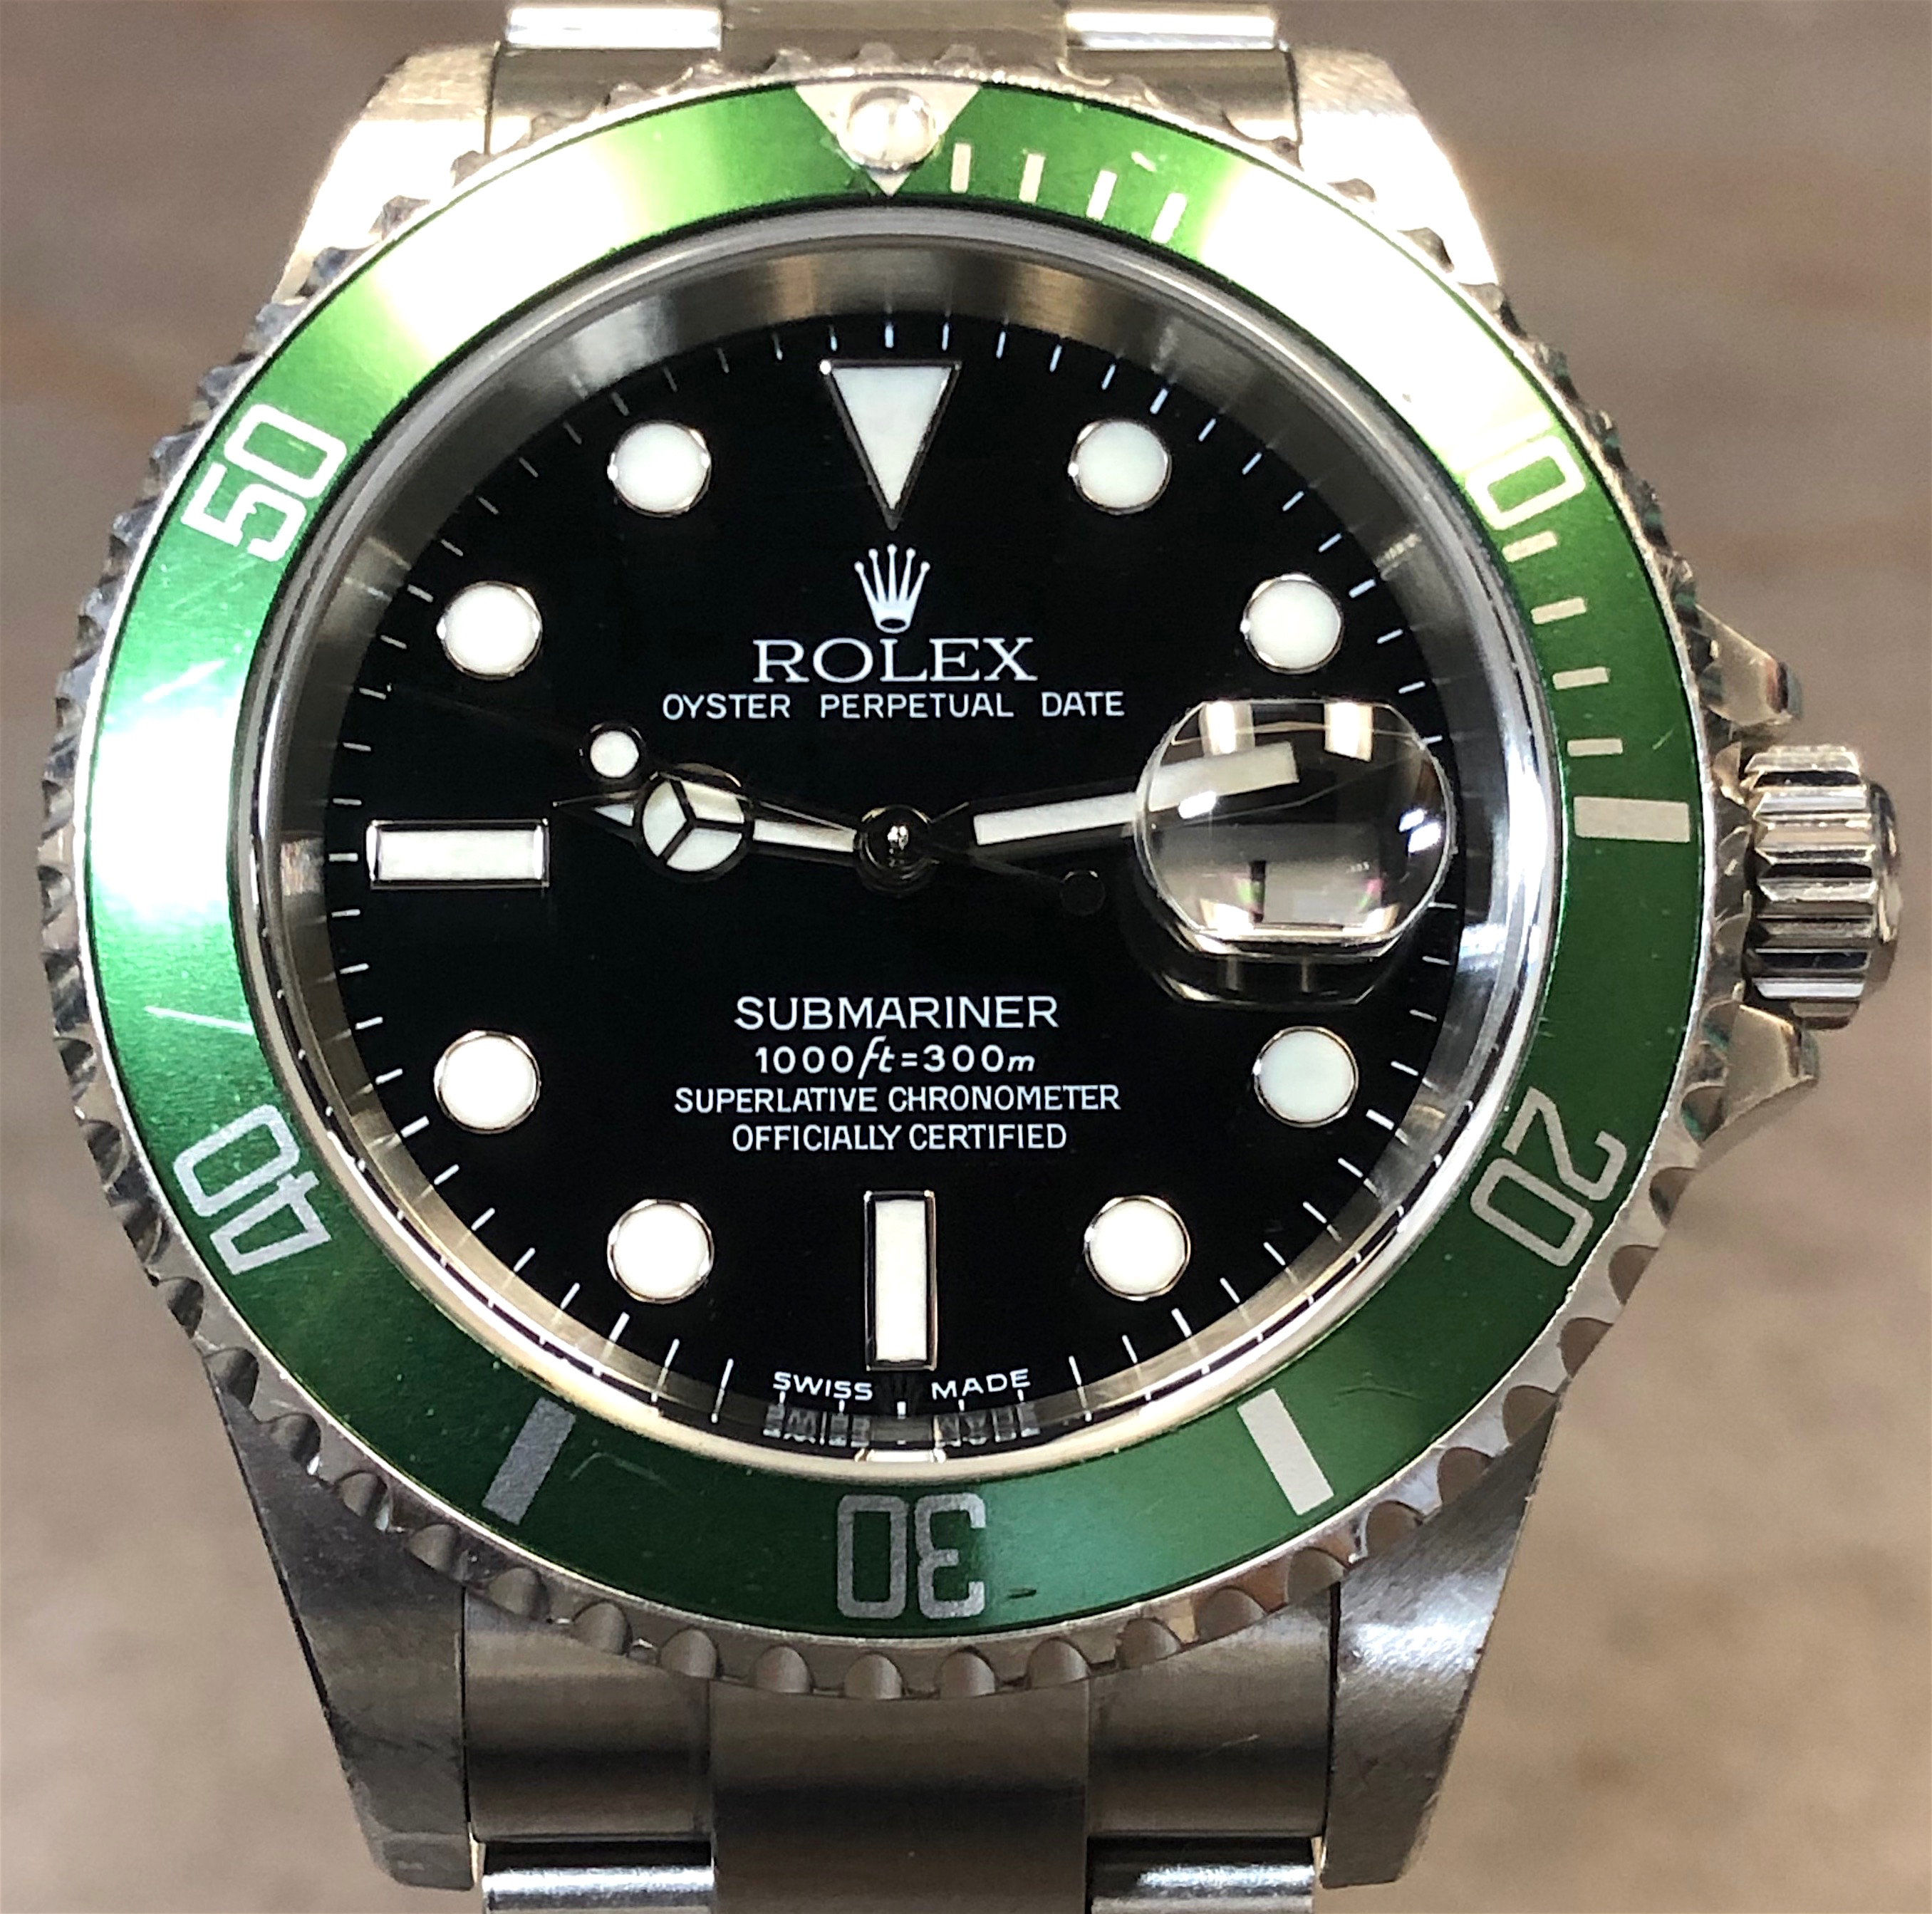 Rolex Submariner Price Los Angeles - How do you Price a Switches?